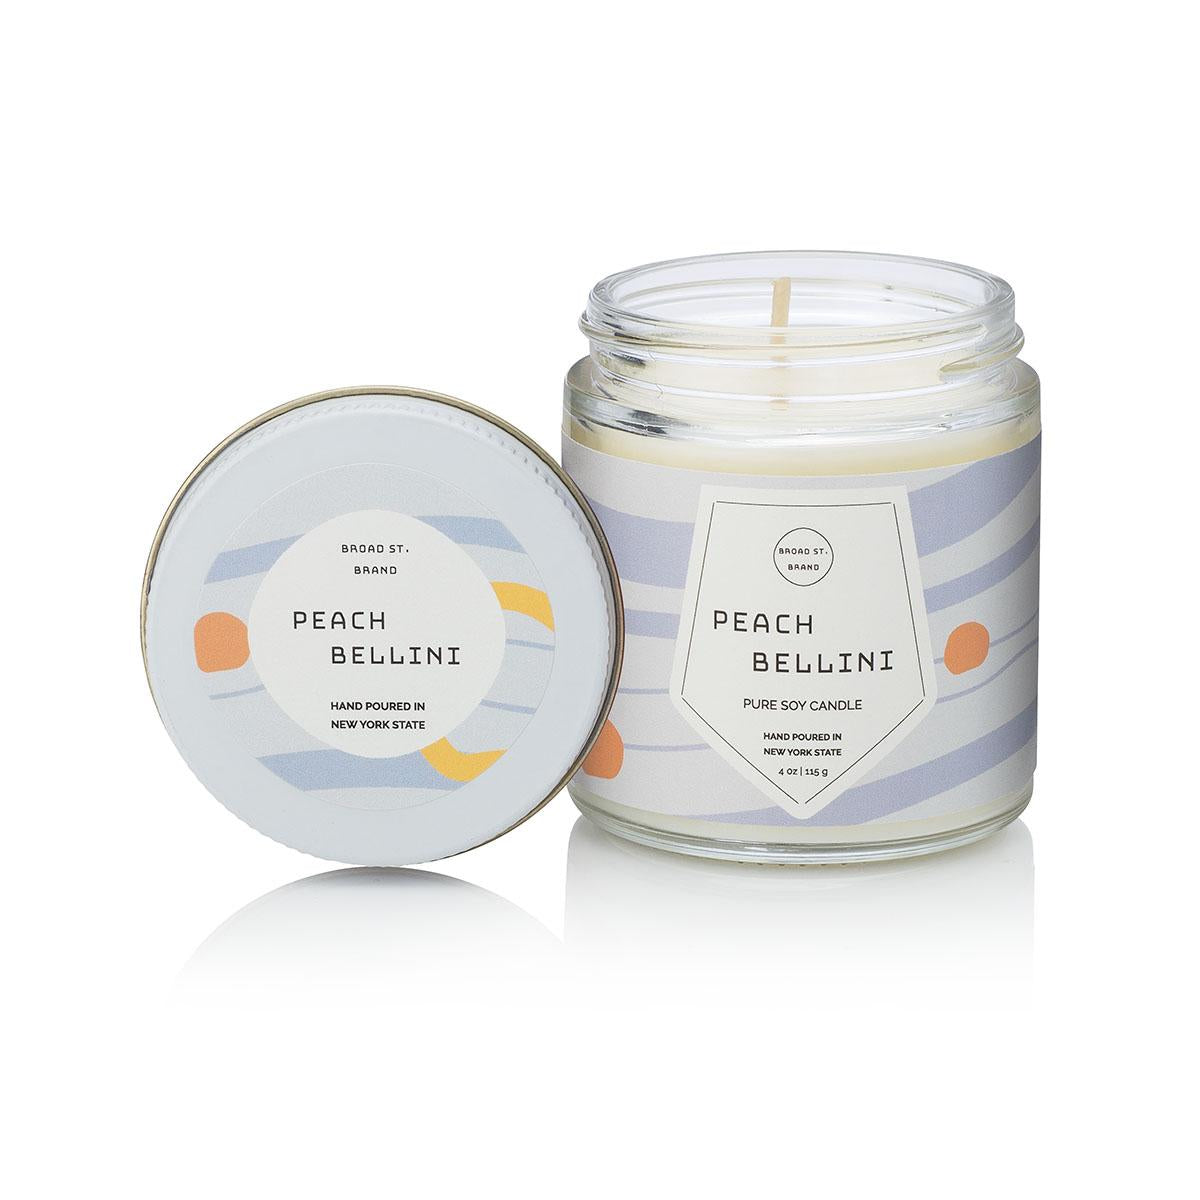 Primary image of Peach Bellini Pure Soy Candle